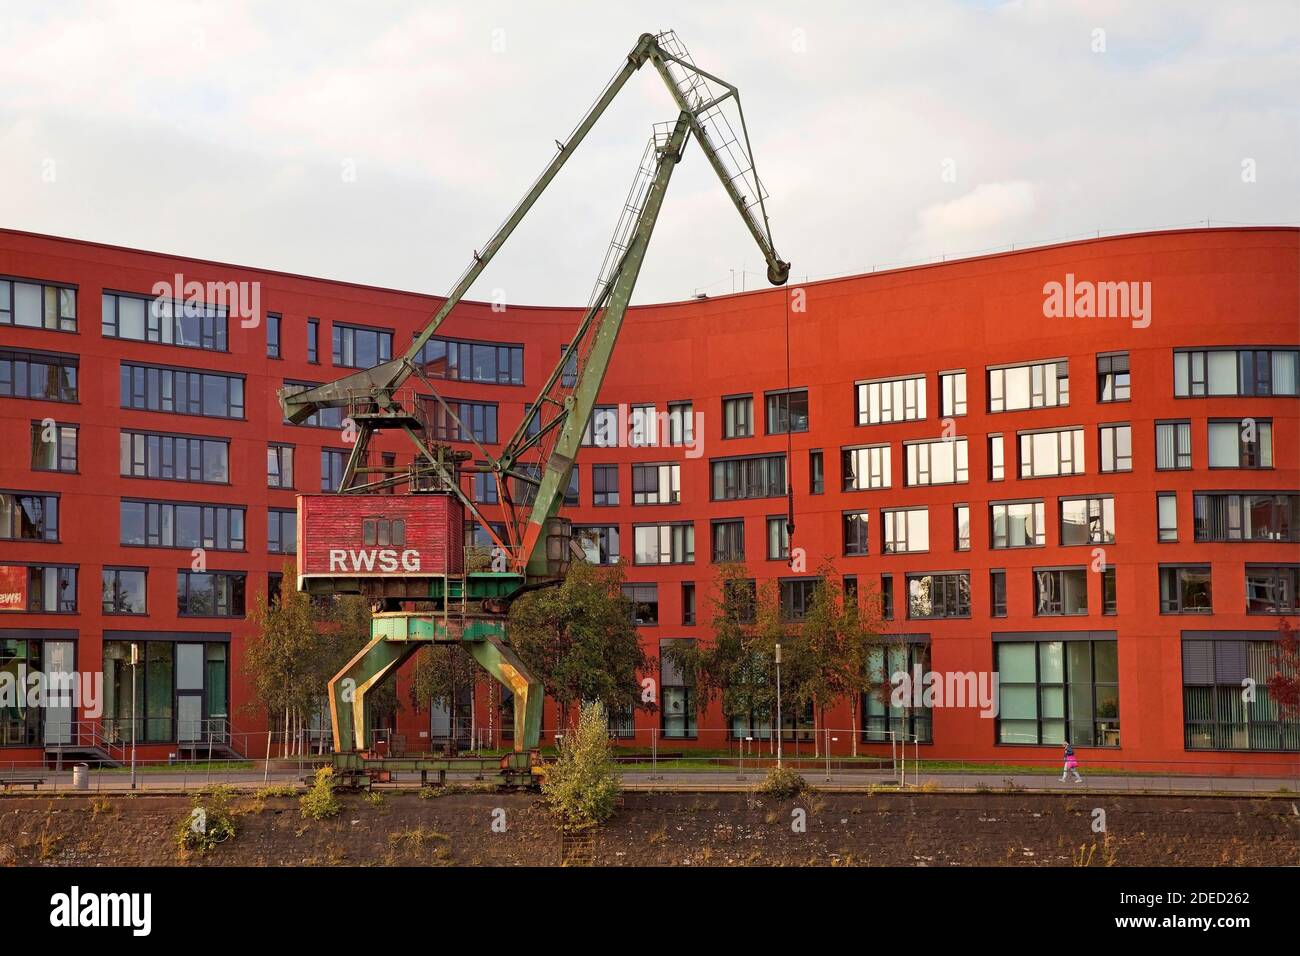 State archive of North Rhine-Westphalia with old port crane in the inner harbor, Germany, North Rhine-Westphalia, Ruhr Area, Duisburg Stock Photo